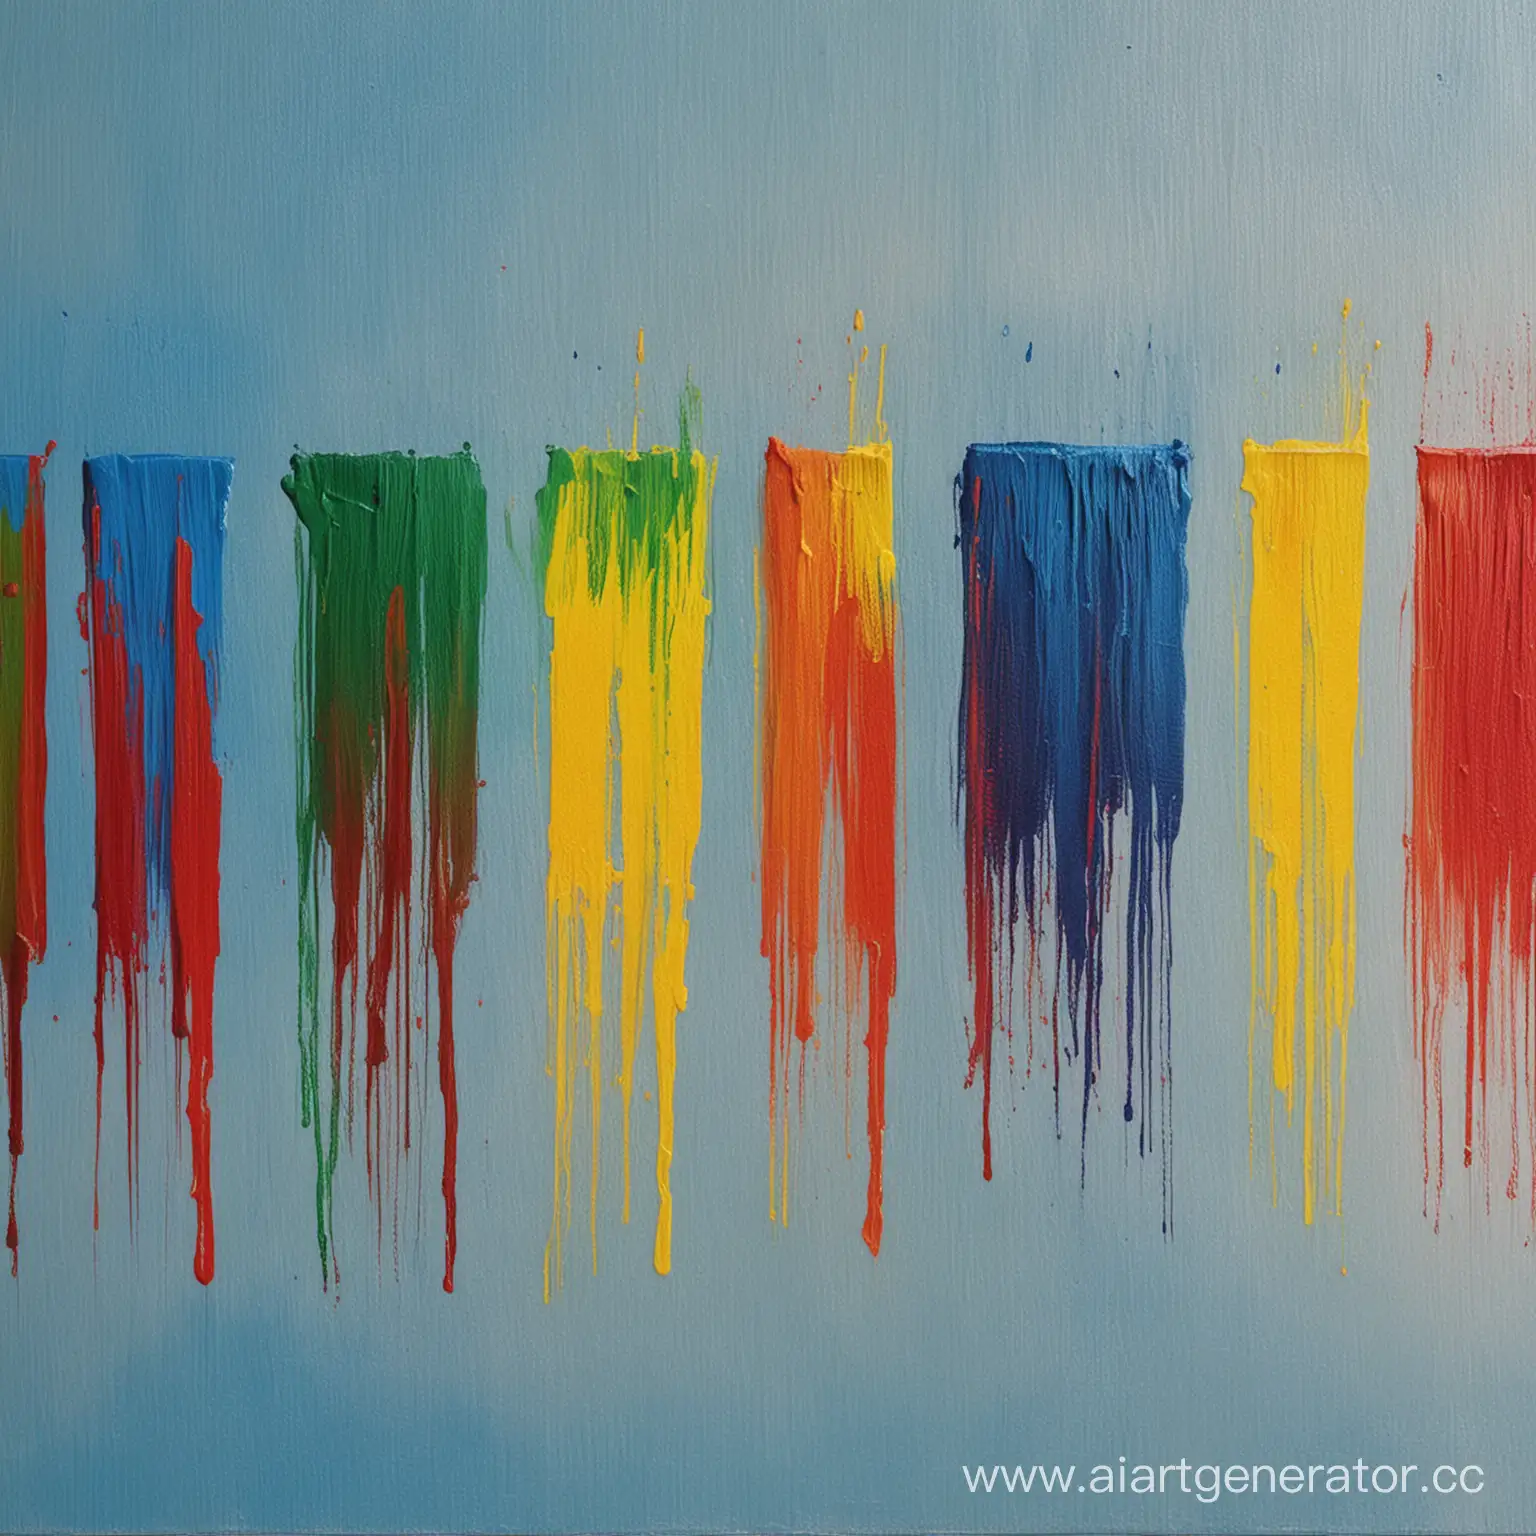 Vibrant-Brush-Strokes-on-Canvas-Expressive-Blue-Red-Green-Yellow-Artwork